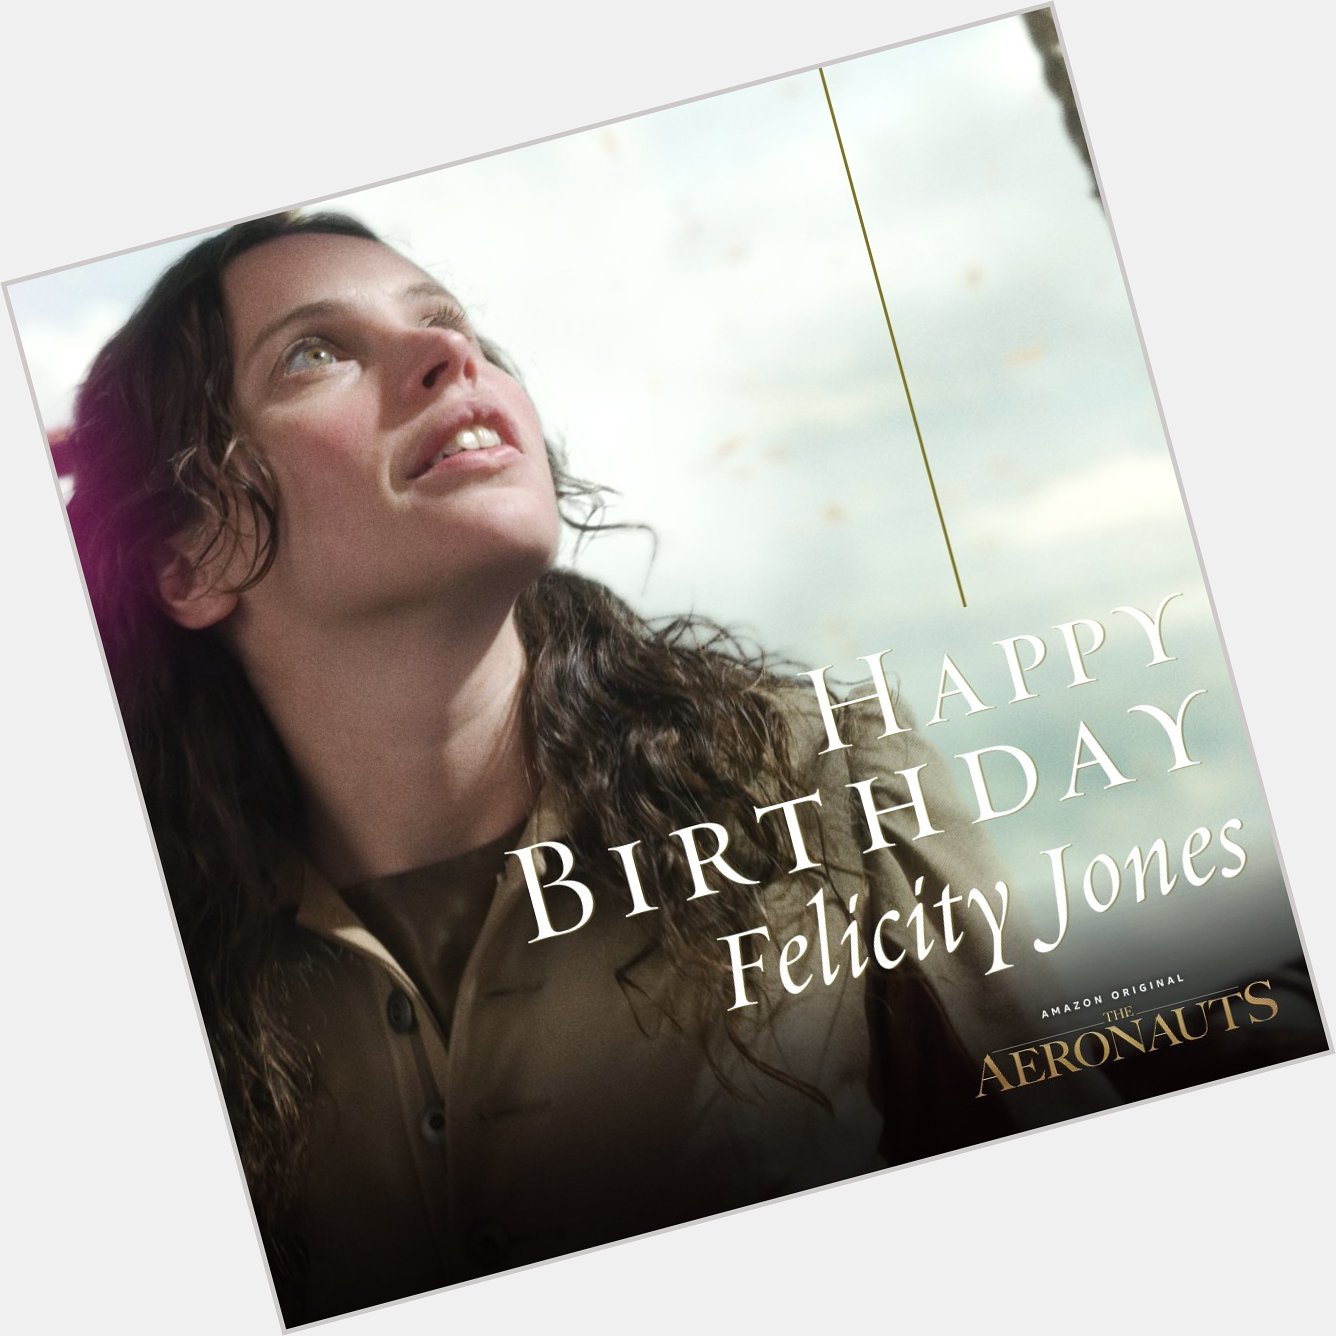 Happy Birthday, Felicity Jones! We can\t wait to soar to new heights with you this December. 